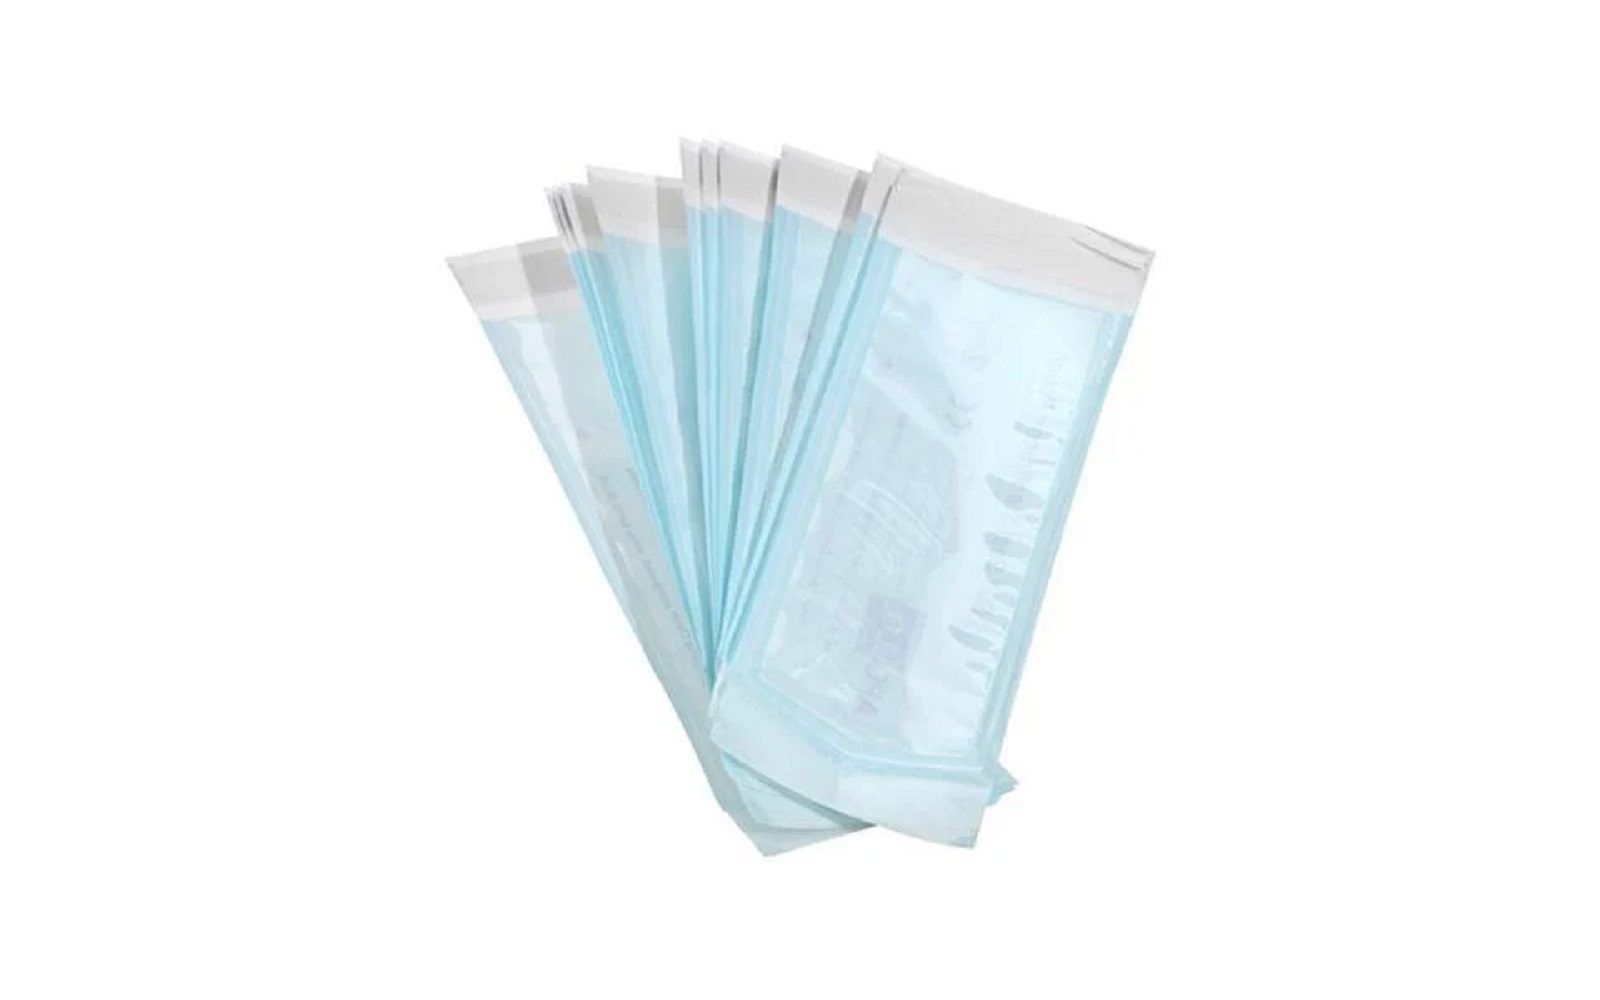 Took a gamble on way too many cases of biohazard autoclave bags, they are  25